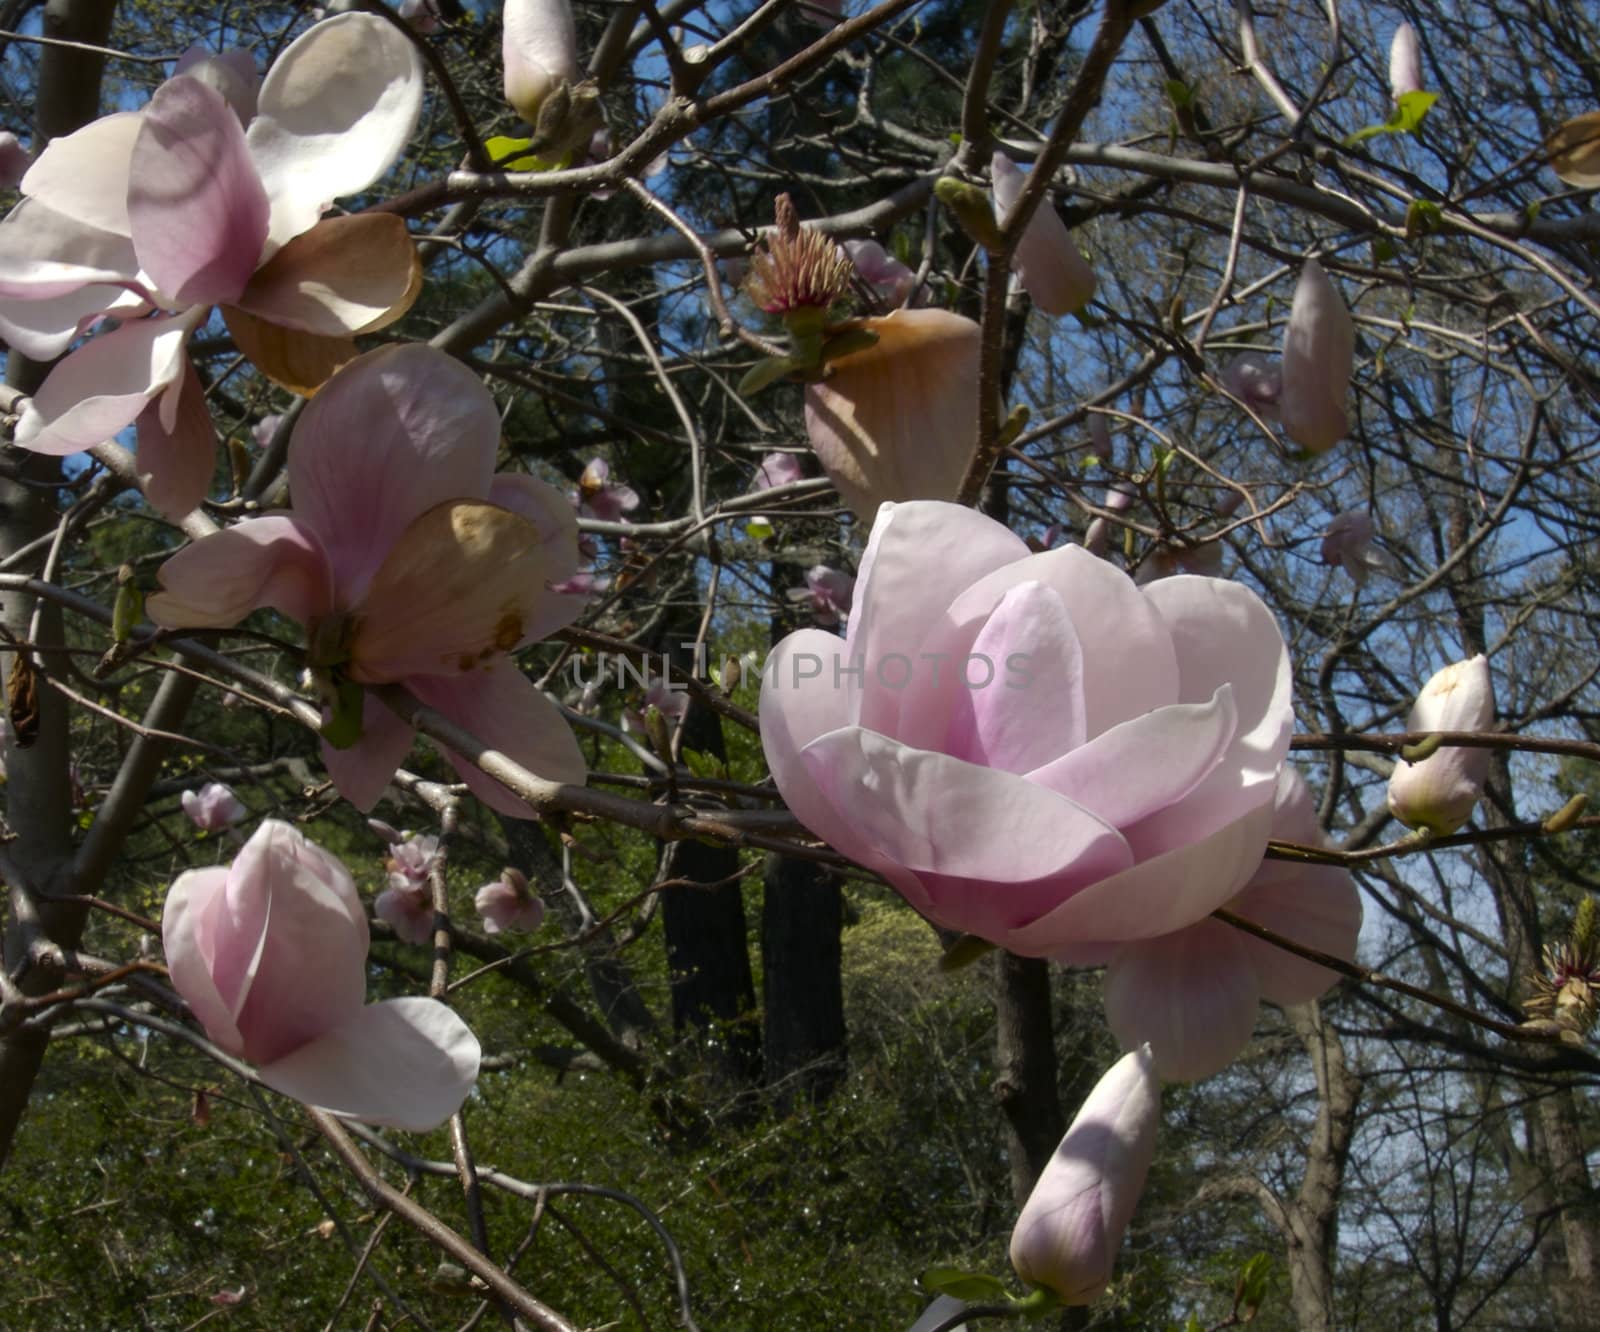 Magnolia Branch and Flowers by npologuy